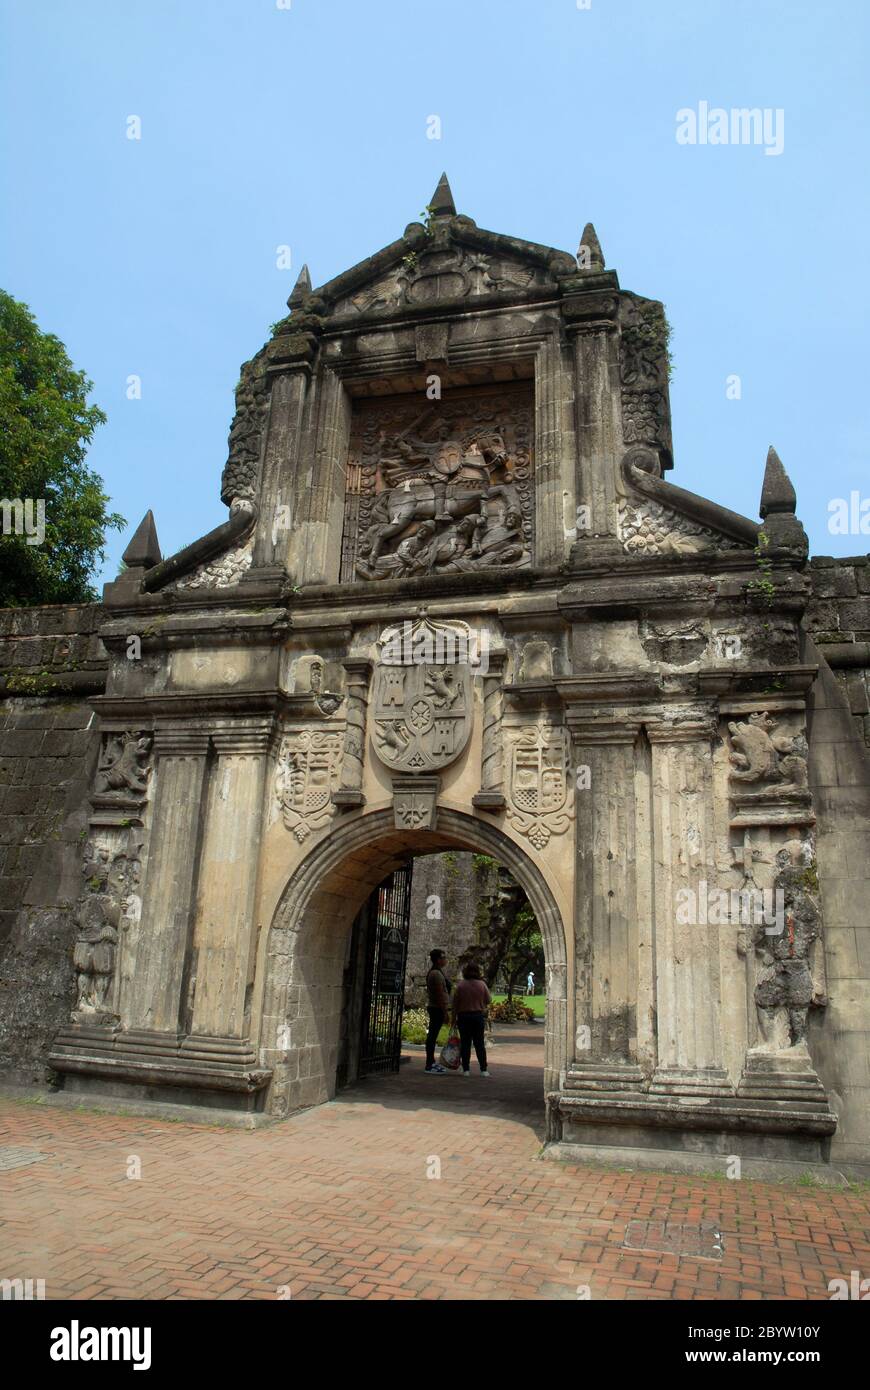 Entrance to Fort Santiago in the Intramuros, Manila, Philippines. Stock Photo